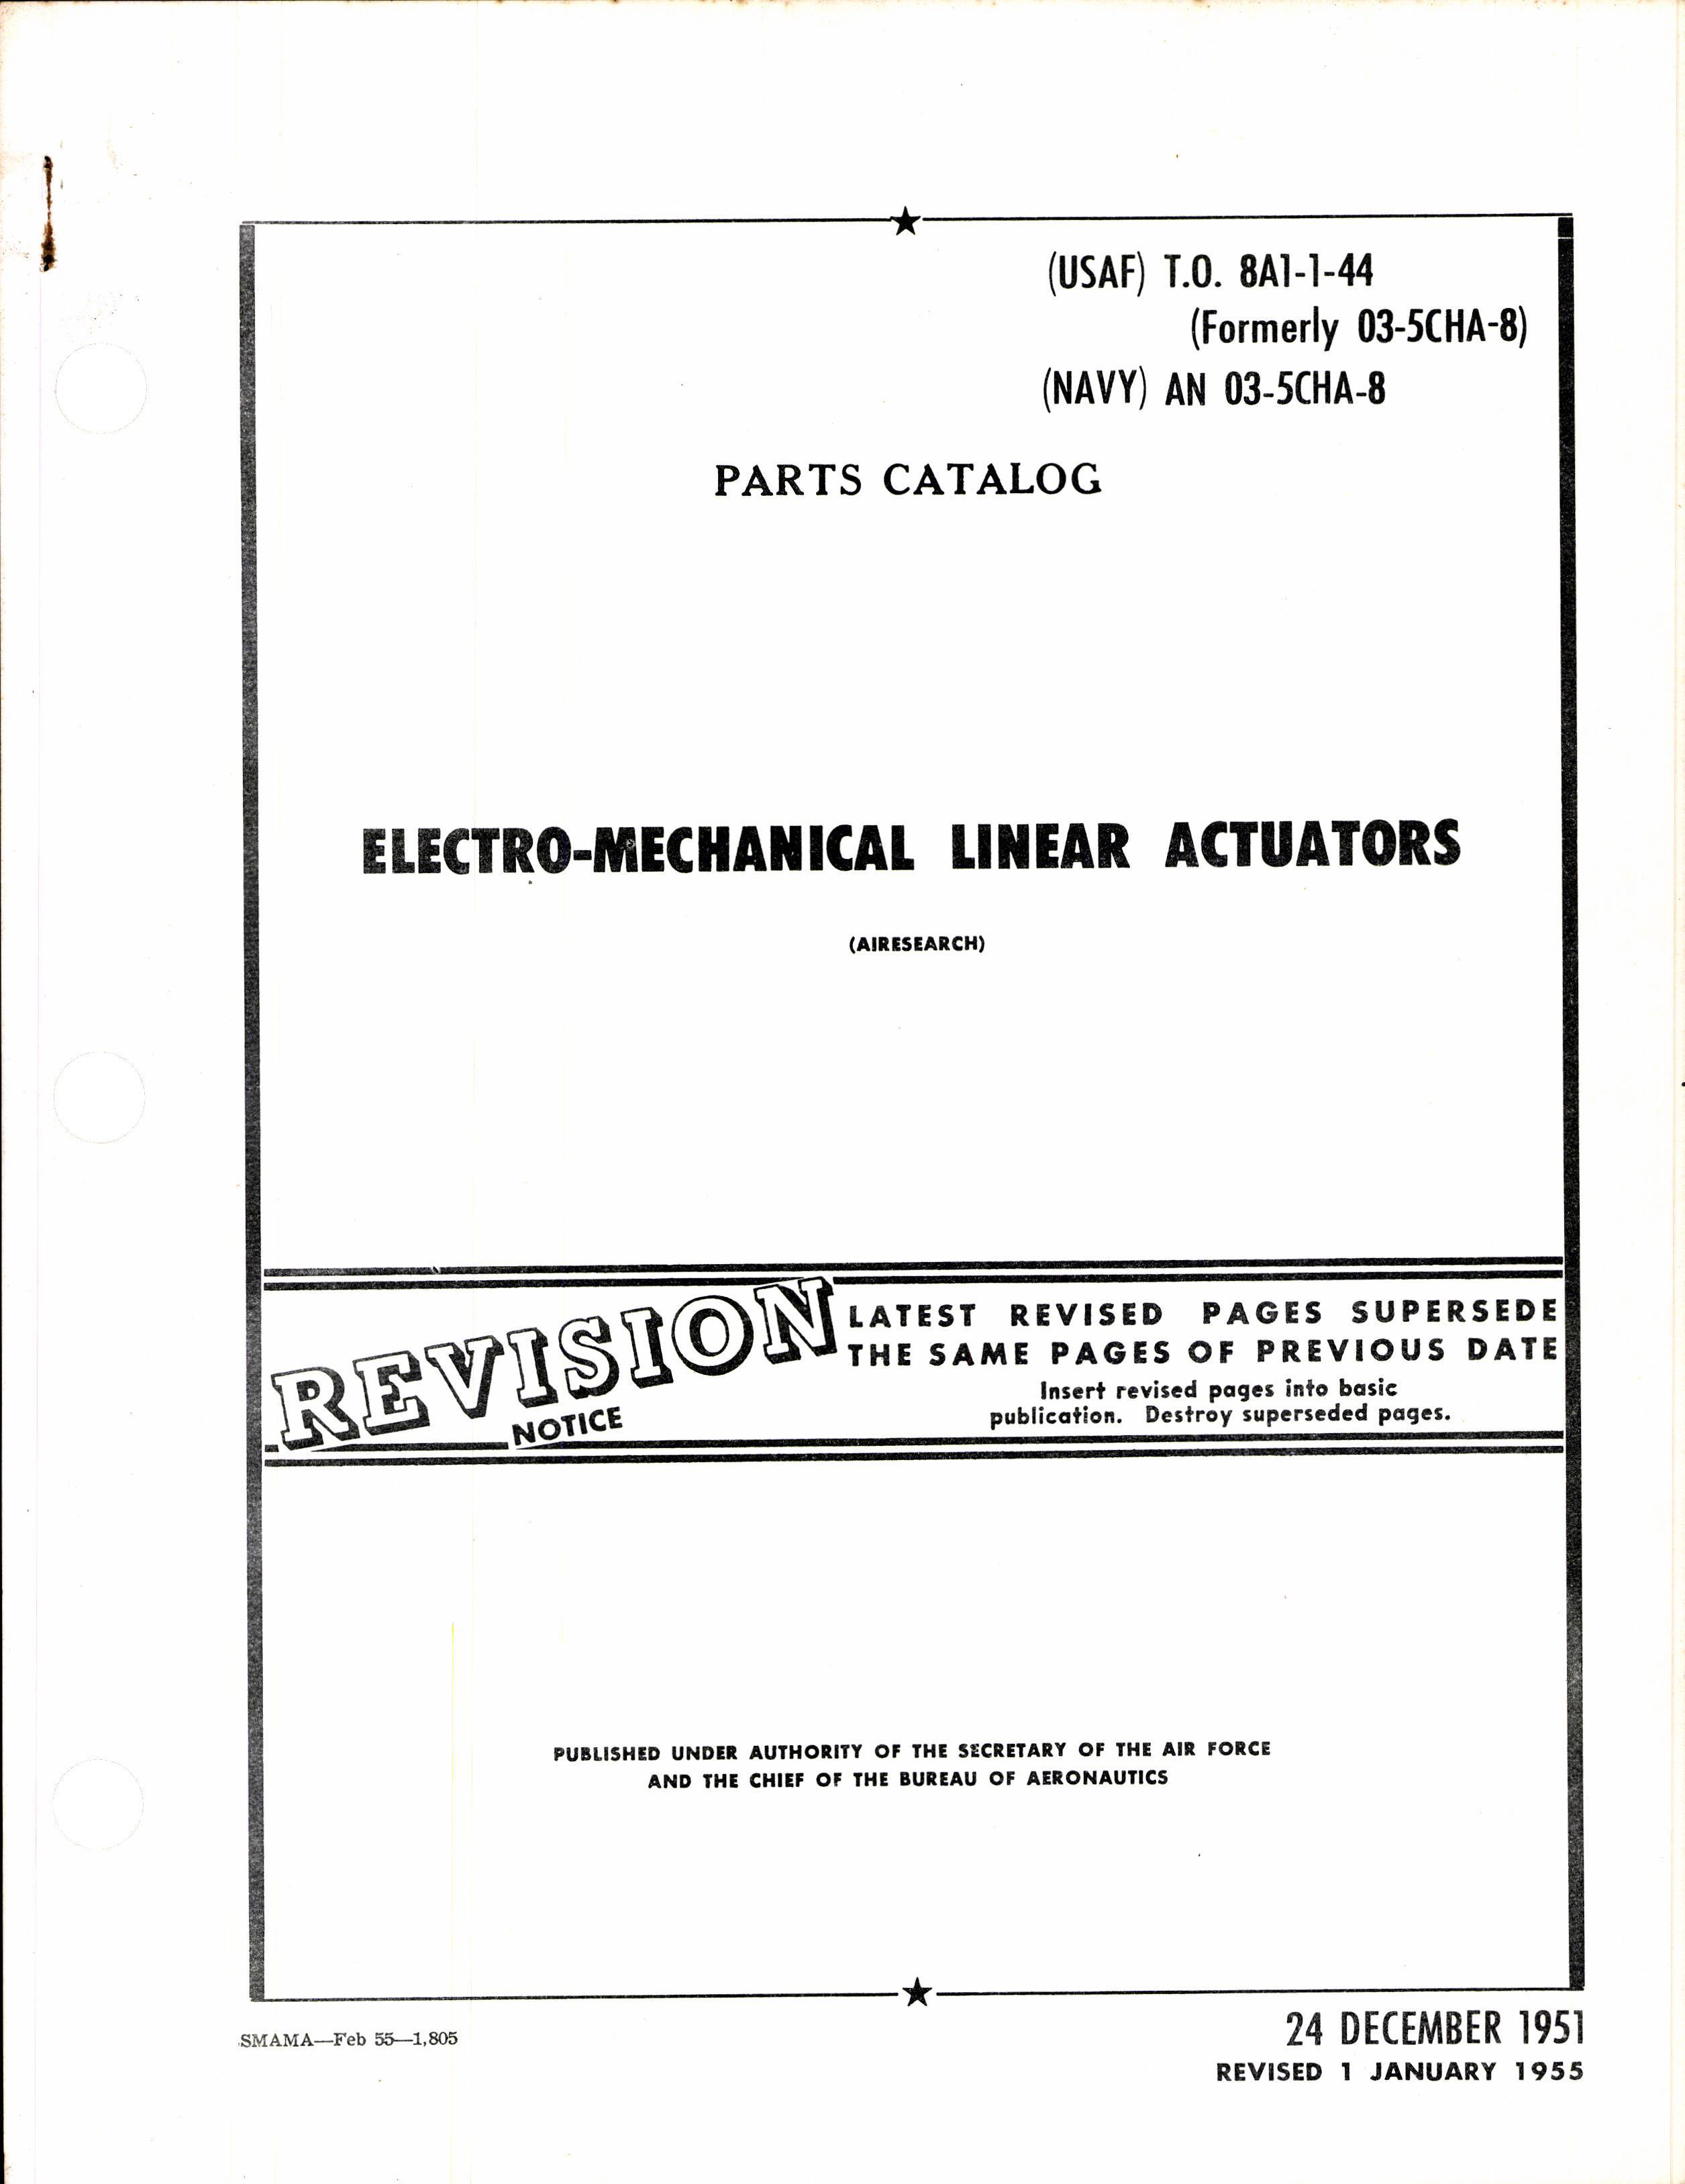 Sample page 1 from AirCorps Library document: Parts Catalog for Electro-Mechanical Linear Actuators